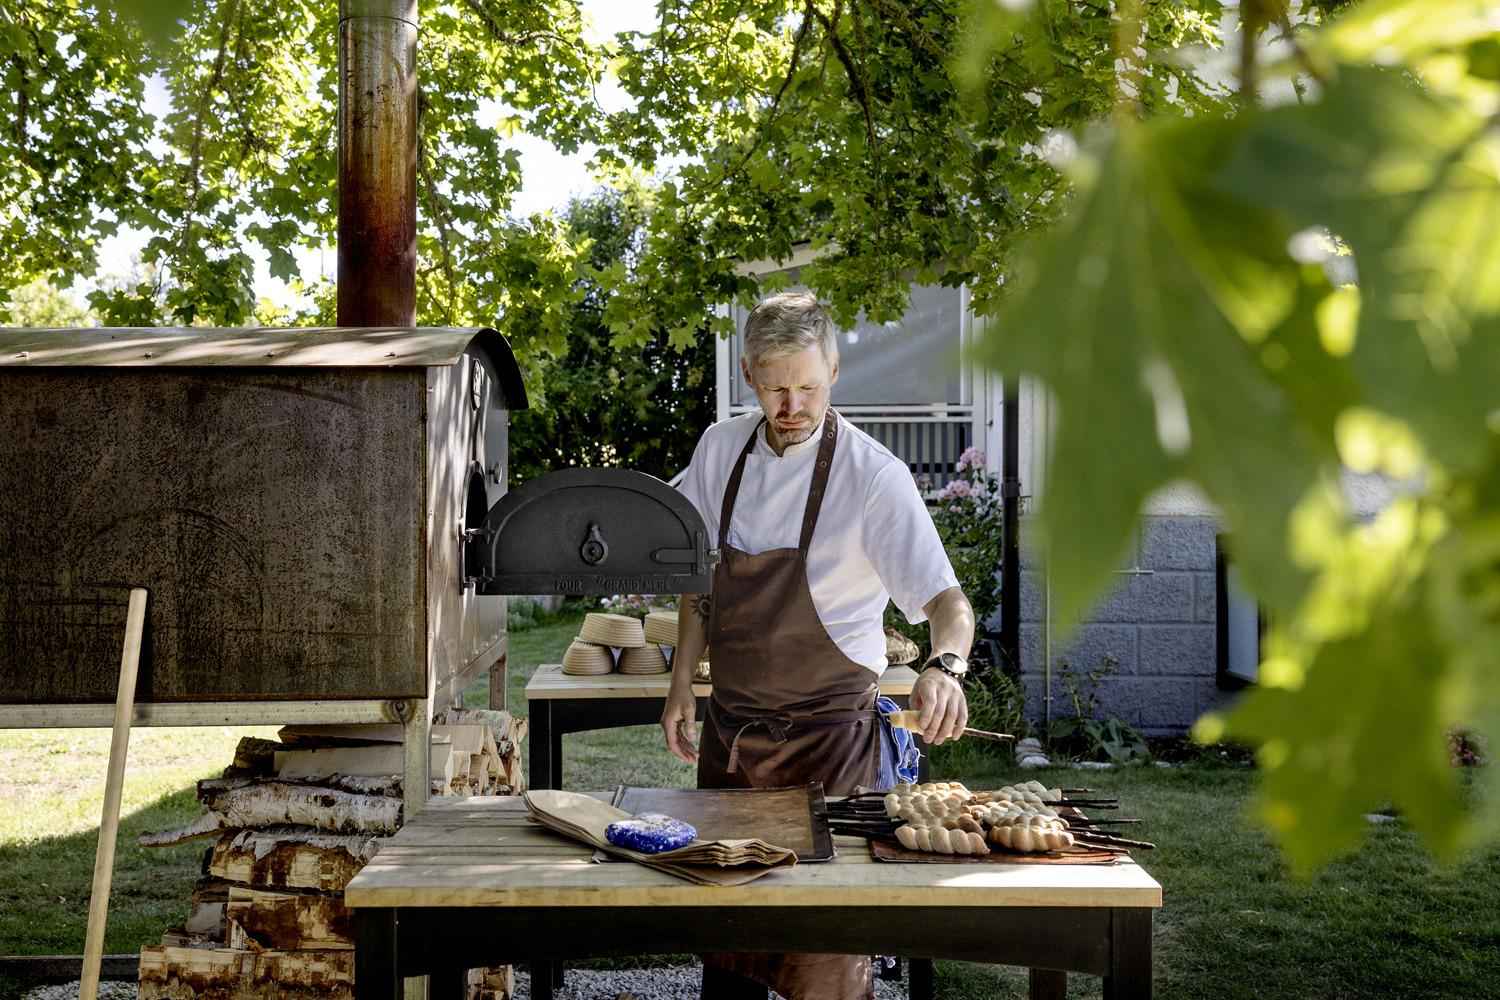 A chef is standing by a wood fired oven in a garden.